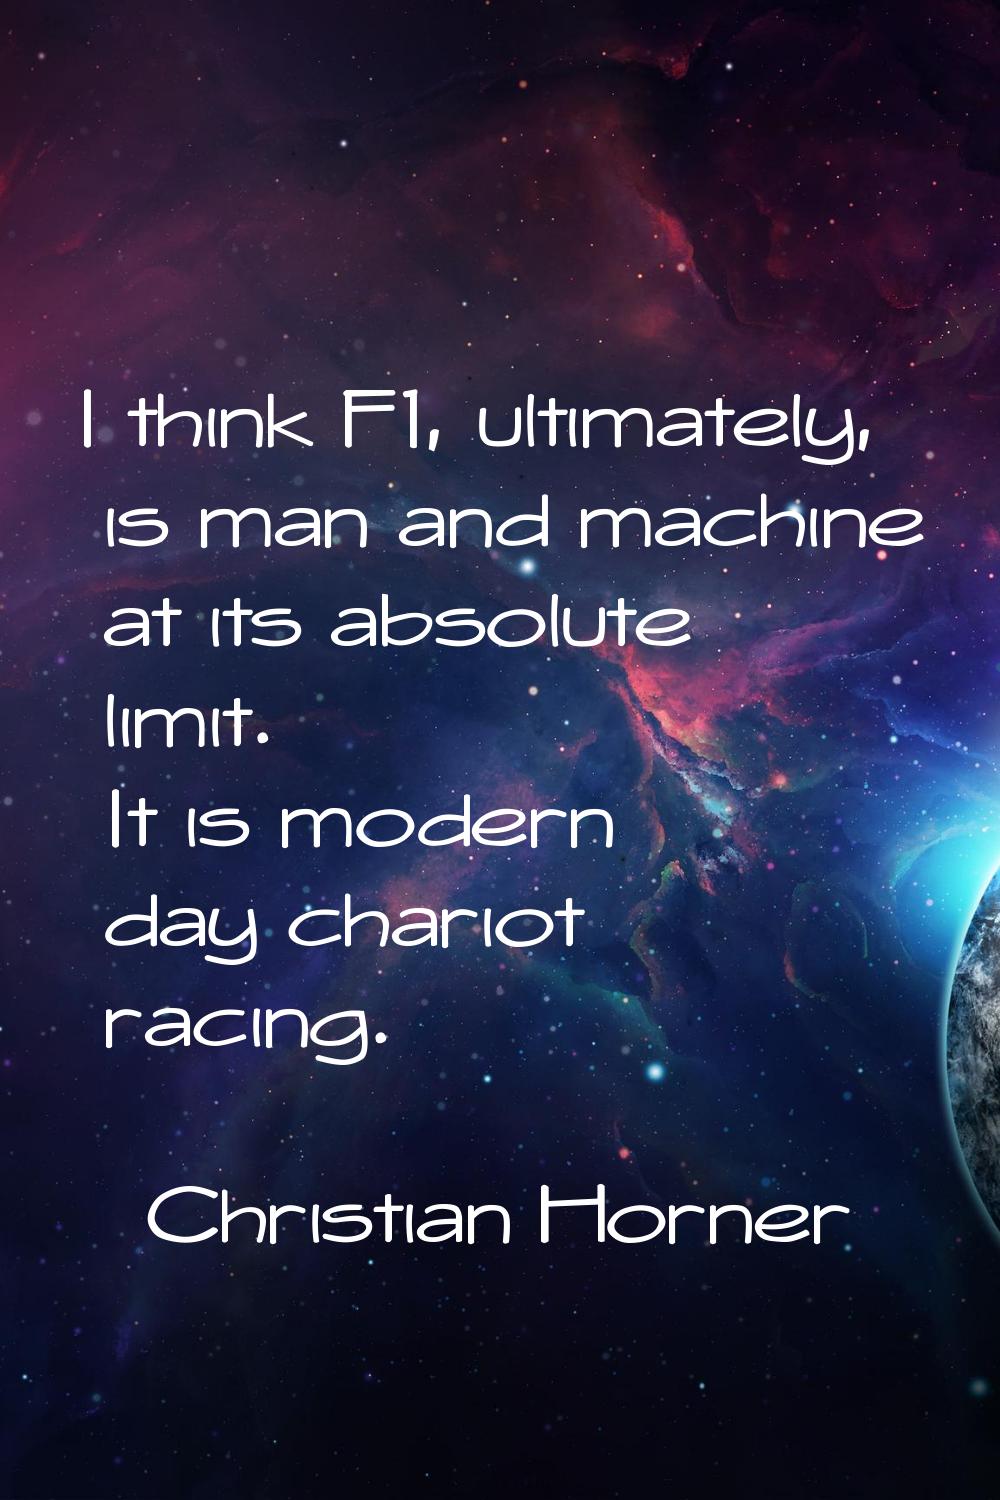 I think F1, ultimately, is man and machine at its absolute limit. It is modern day chariot racing.